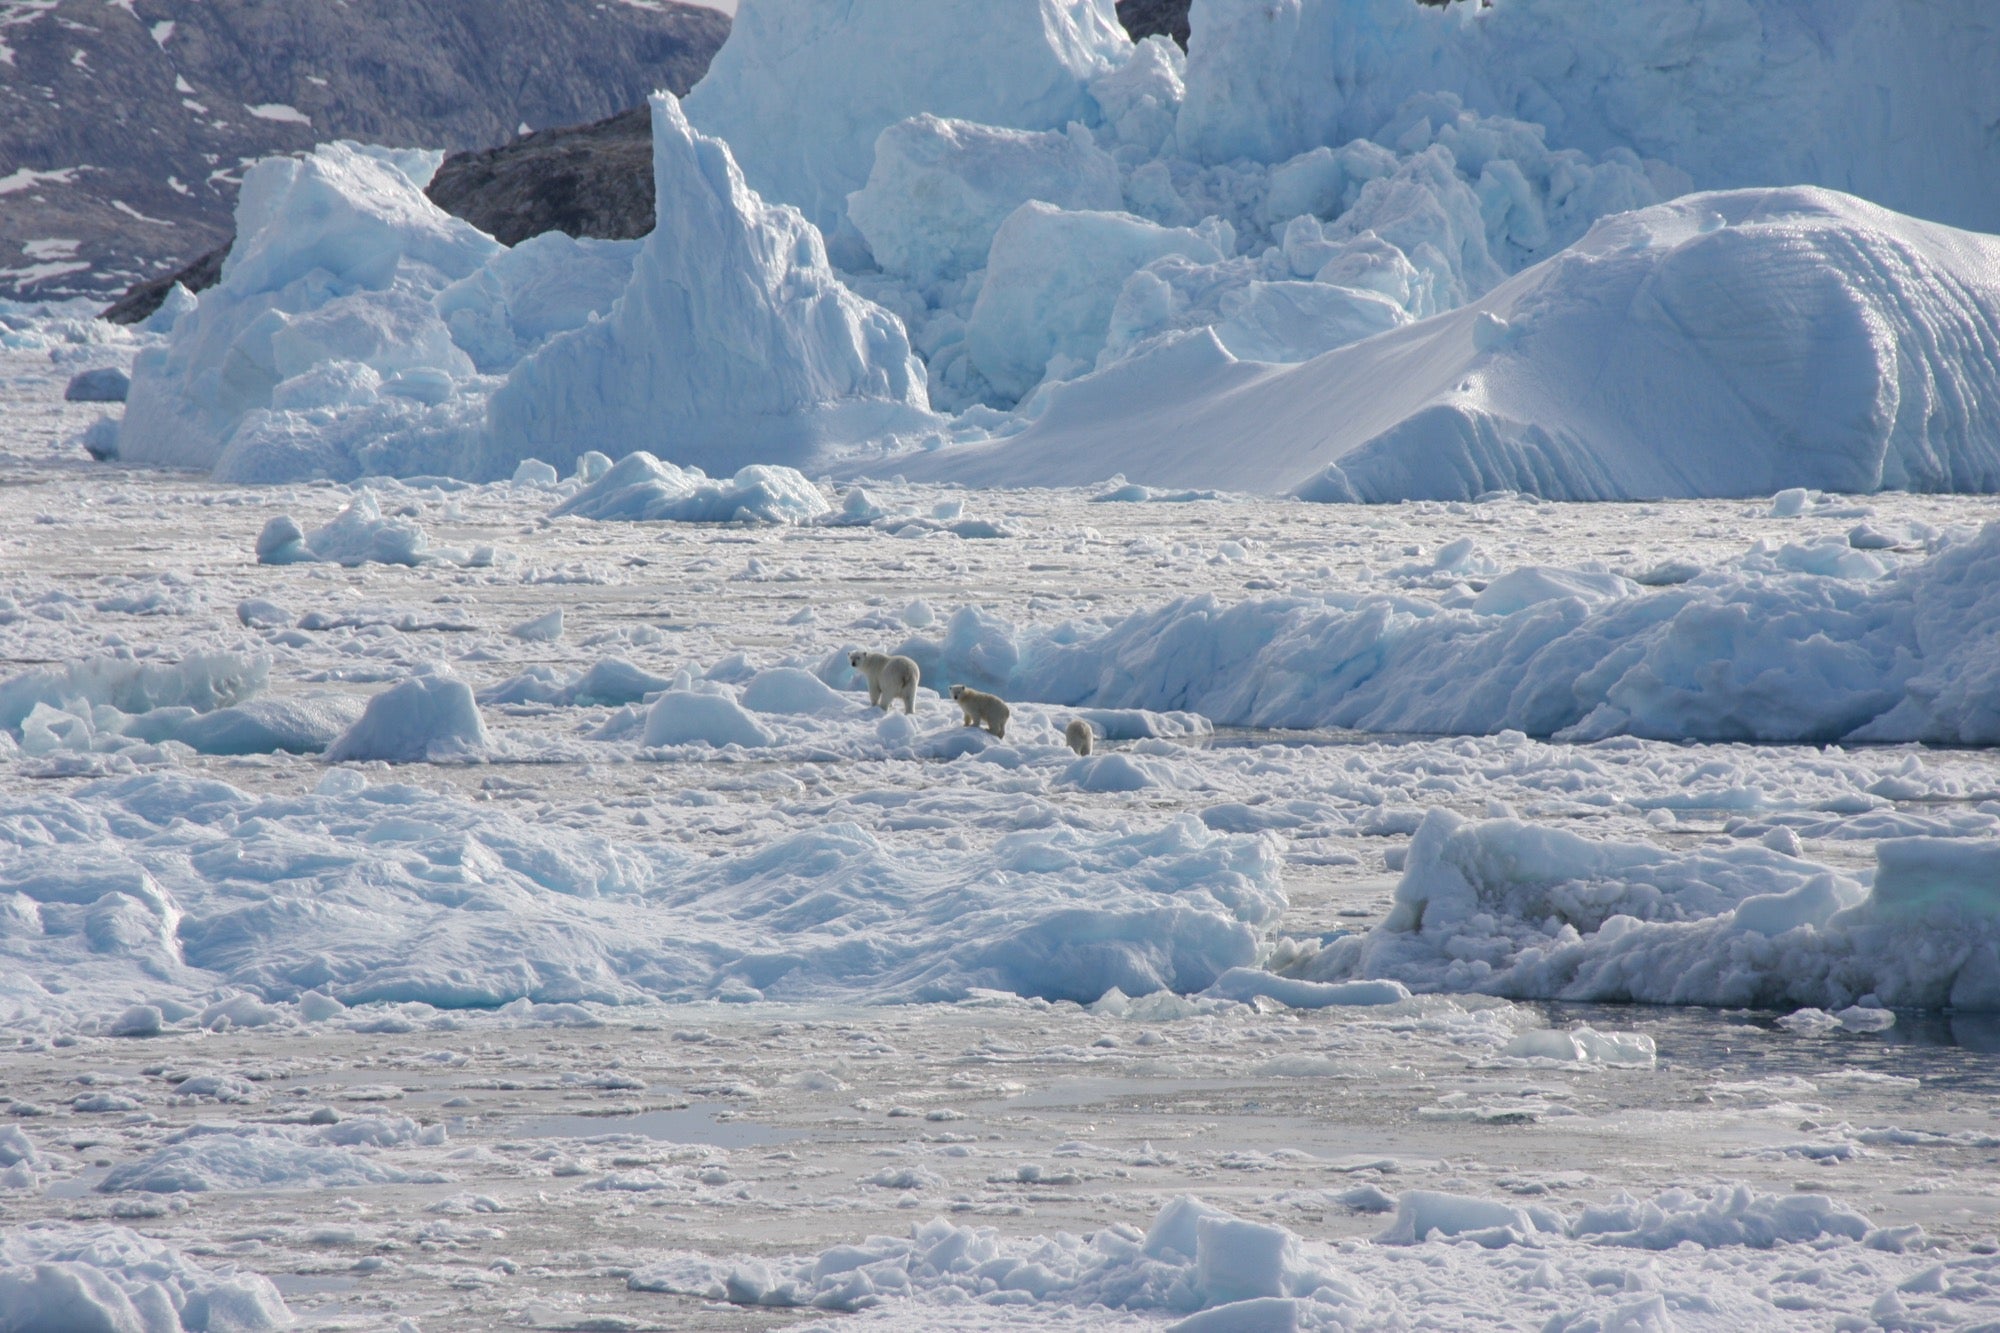 Greenland’s polar bears are learning to get around in a less icy world thumbnail